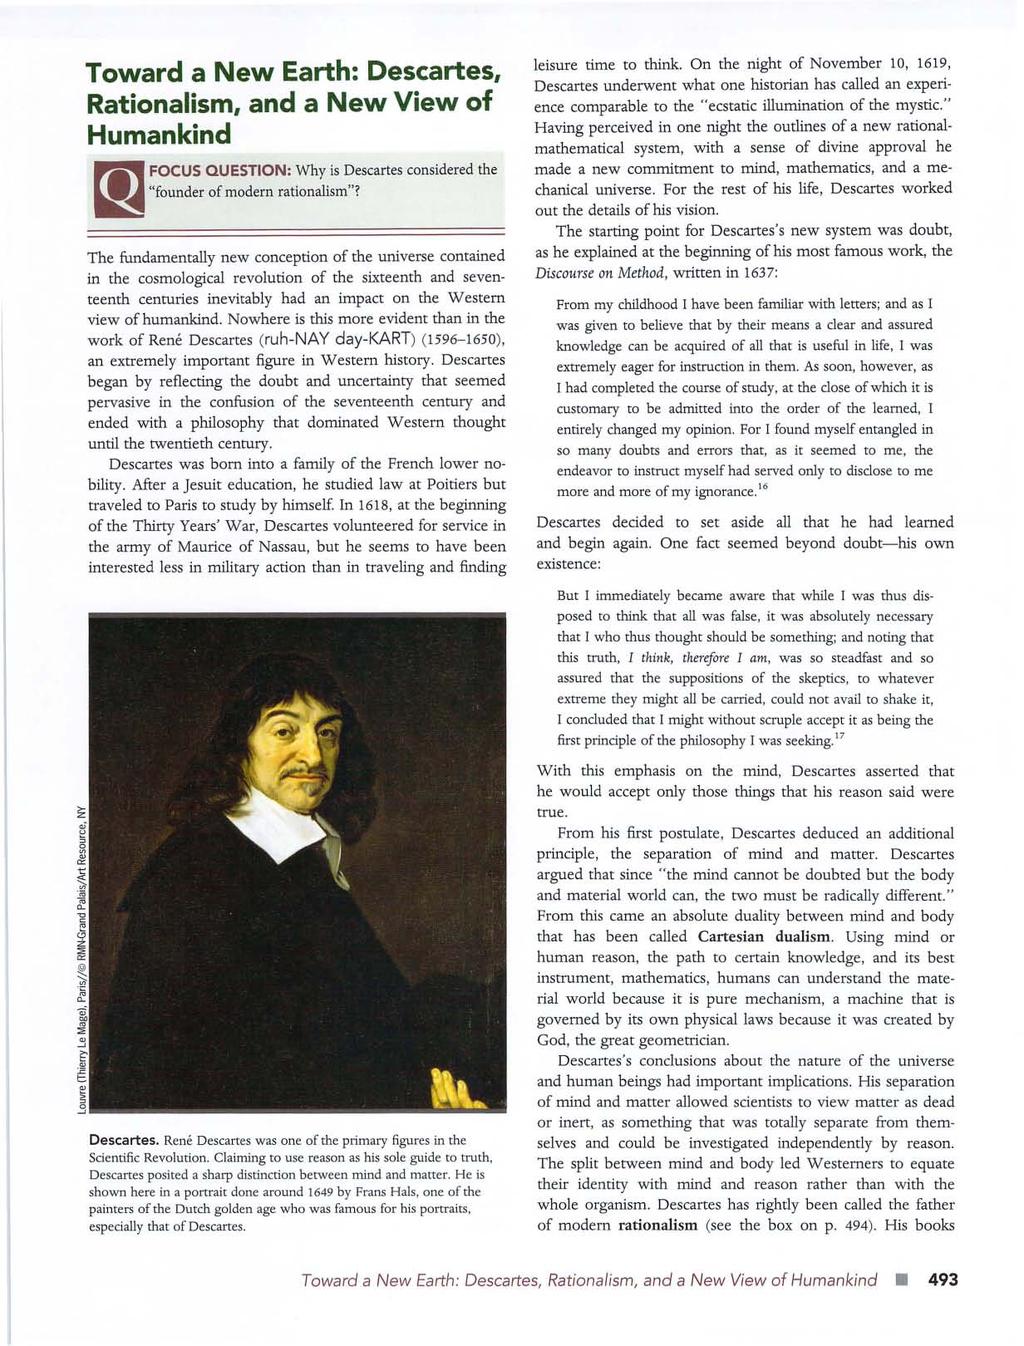 Toward a New Earth: Descartes, Rationalism, and a New View of Humankind FOCUS QUESTION: Why is Descartes considered the "founder of modern rationalism"?